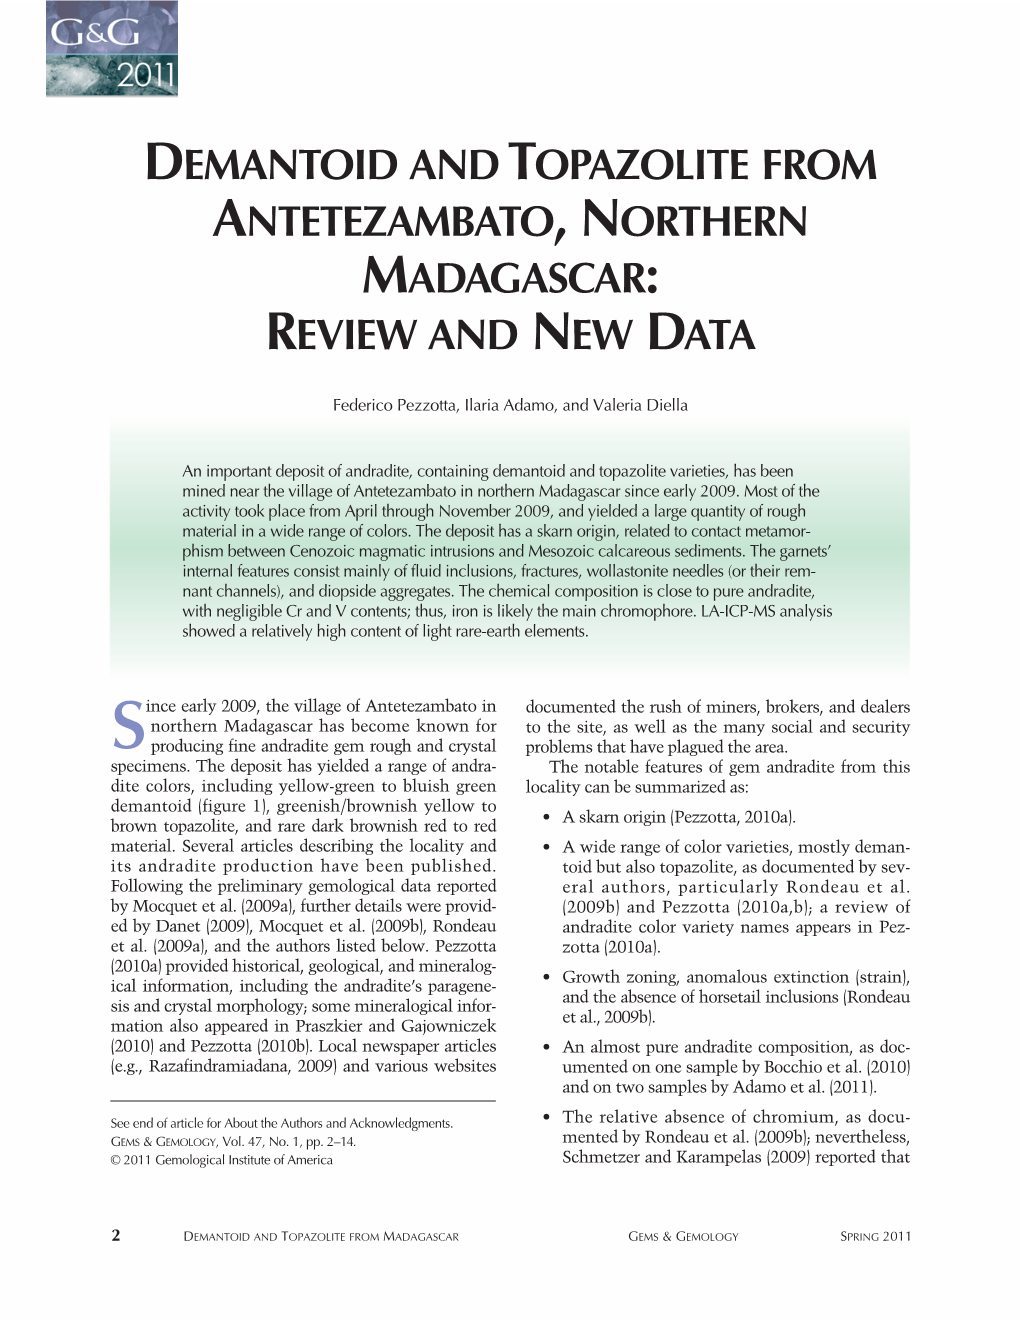 Demantoid and Topazolite from Antetezambato, Northern Madagascar: Review and New Data